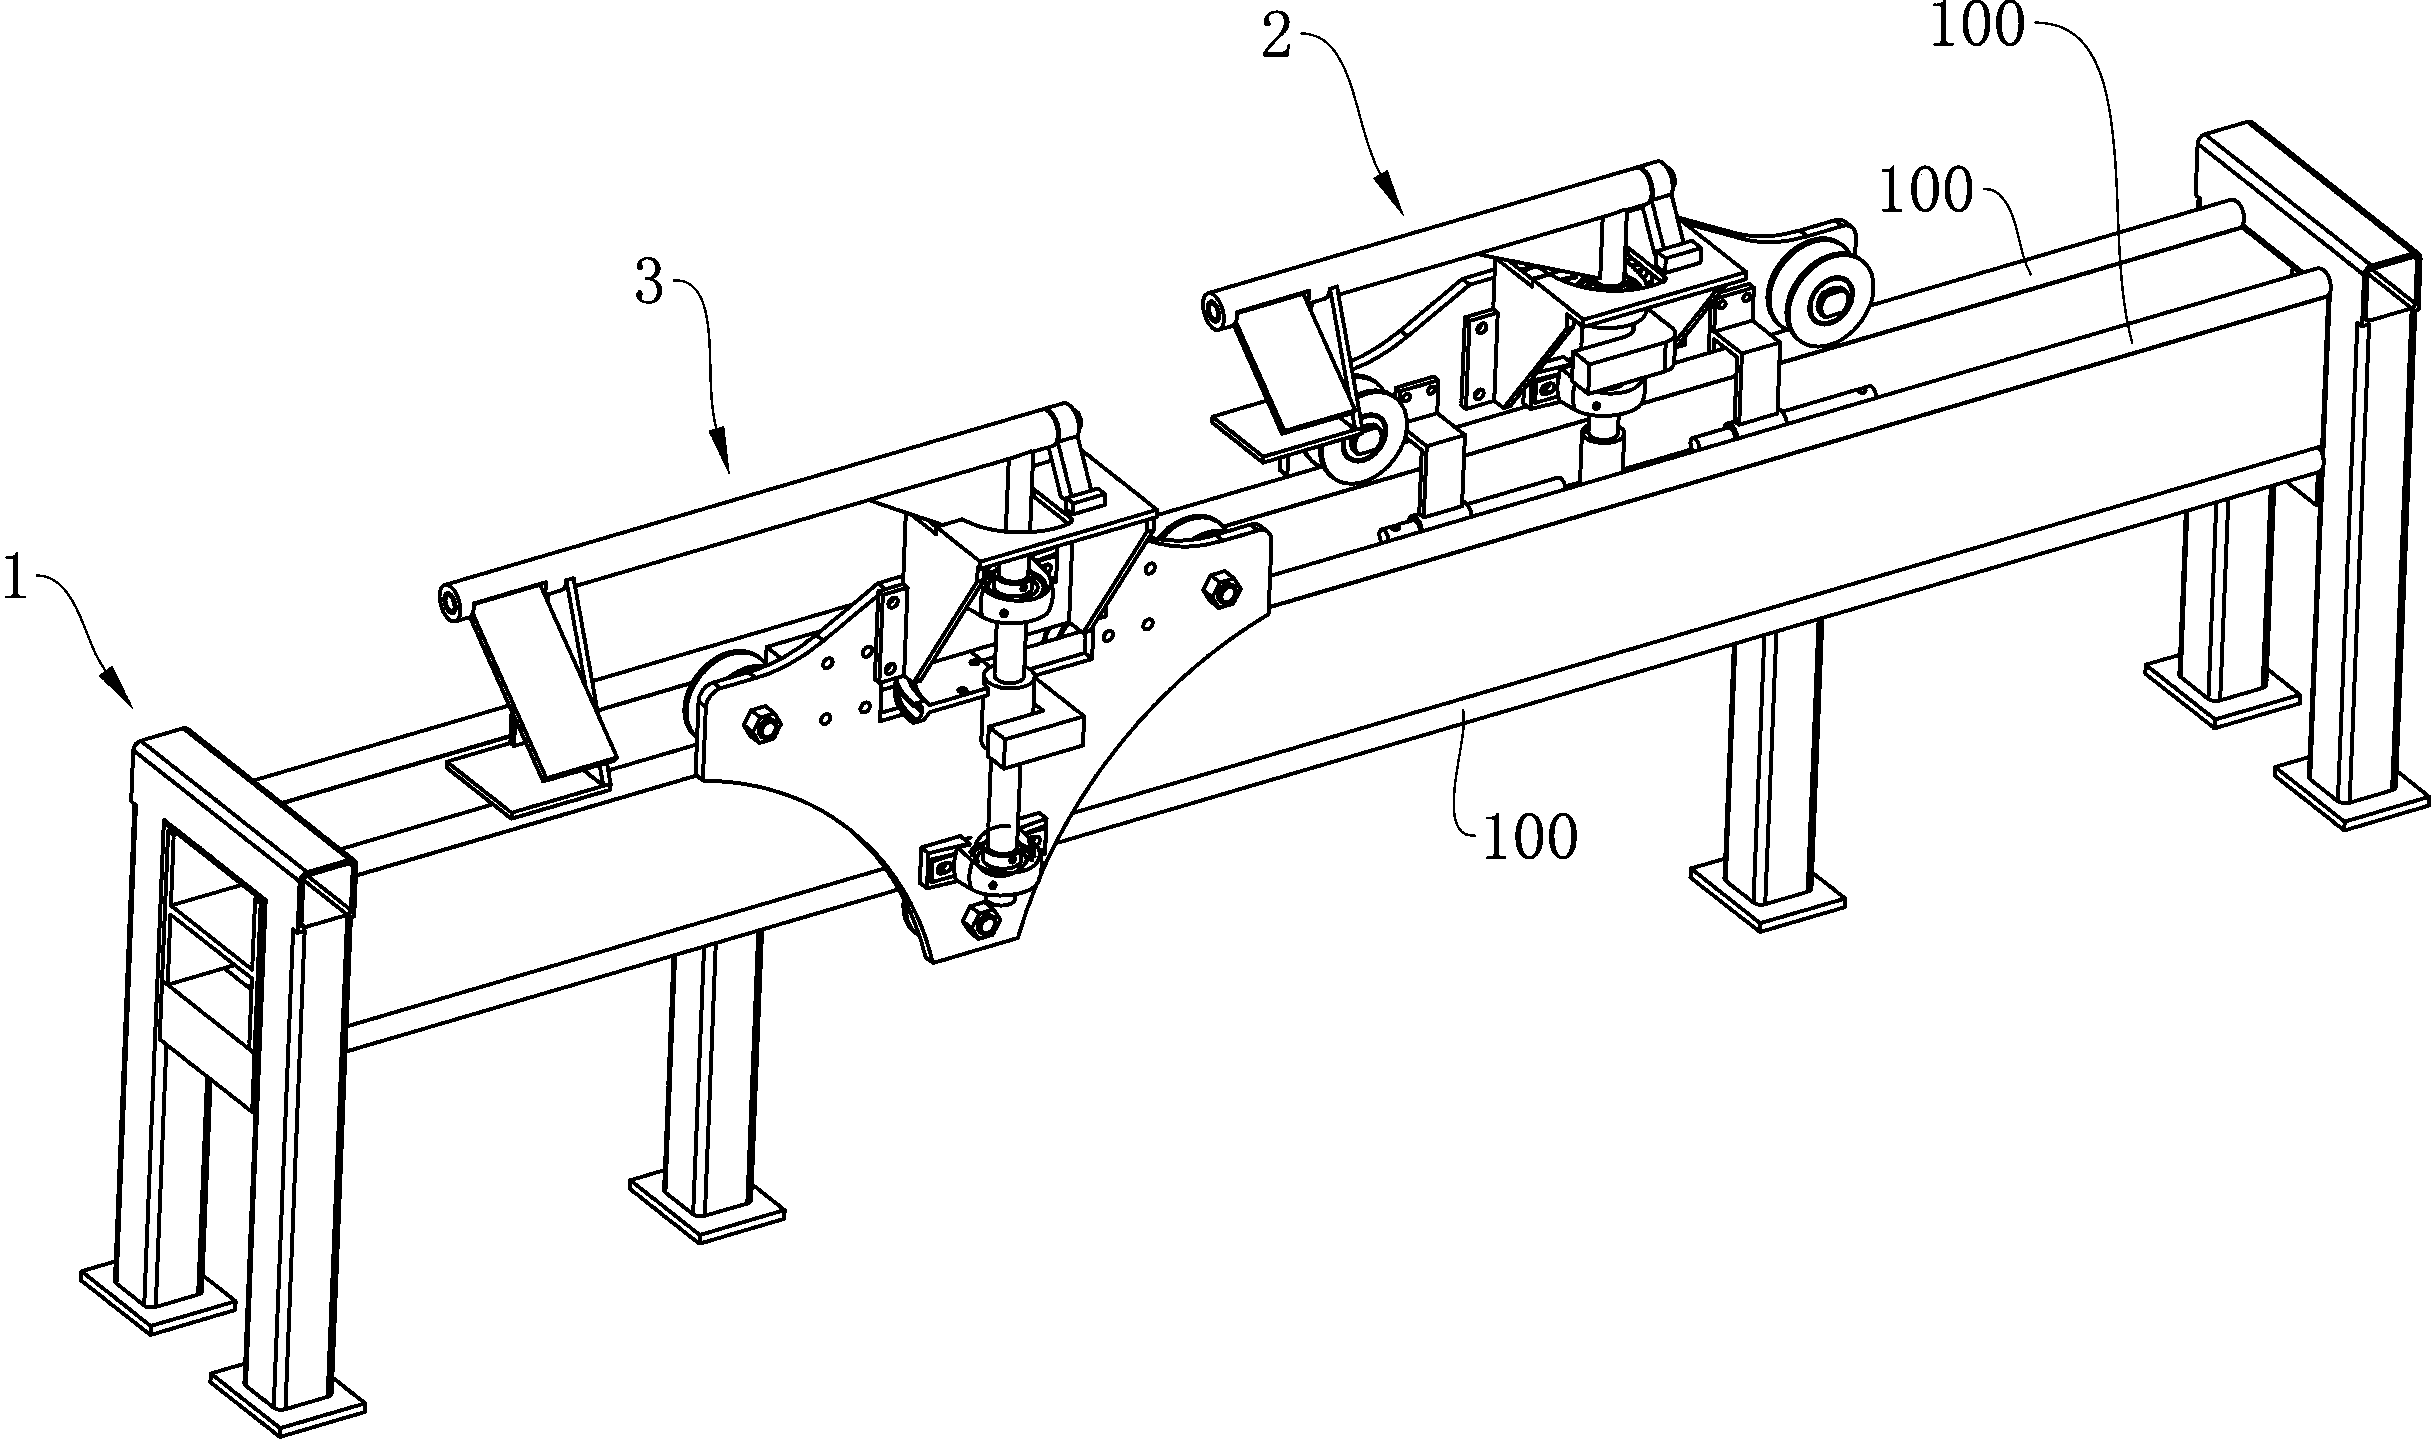 Simple aluminum section traction system